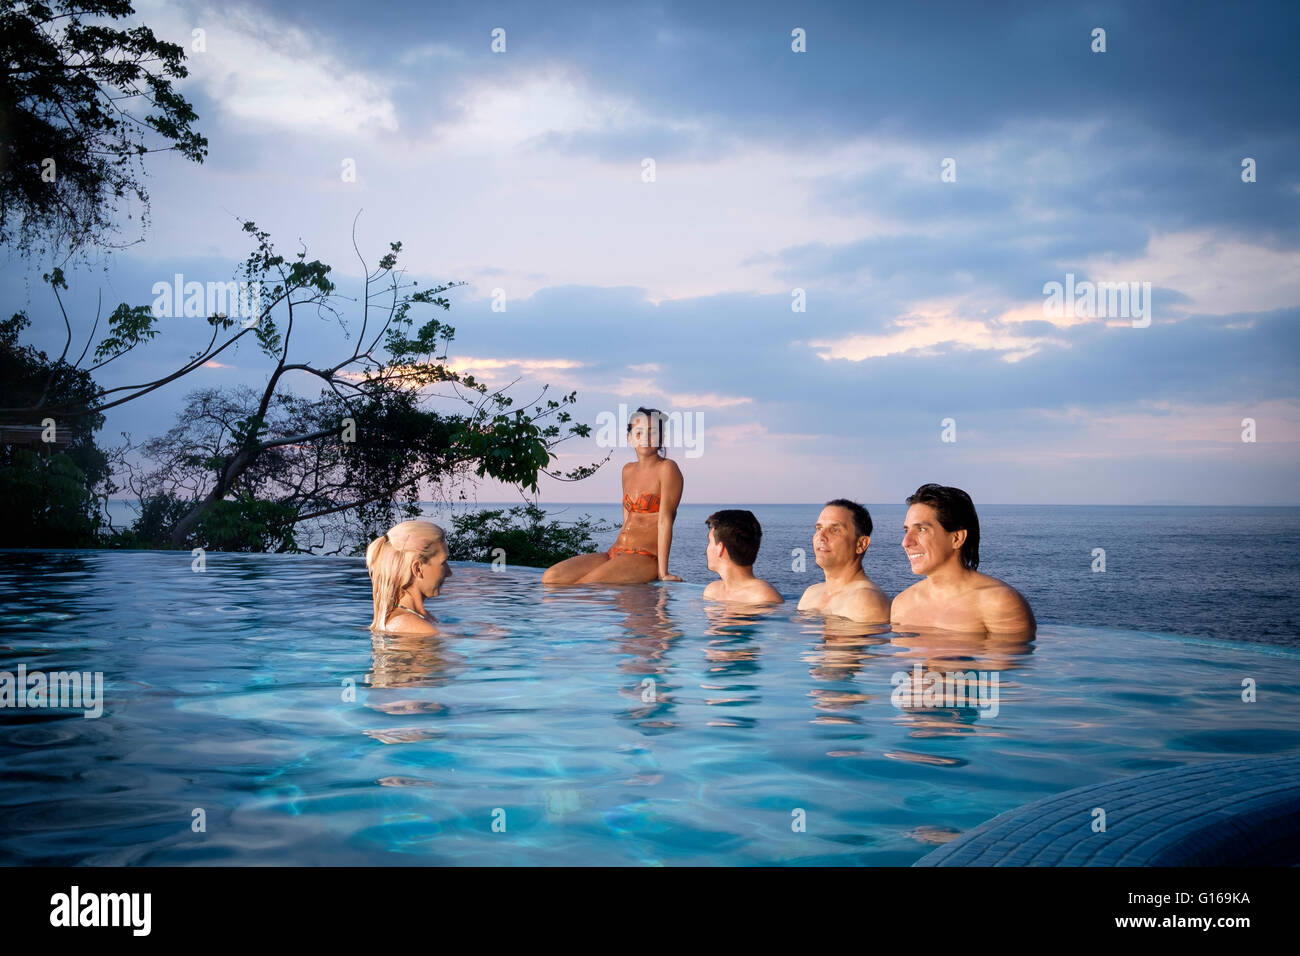 Five young people about to start party in infnity swimming pool in Puerto Vallarta, Mexico Stock Photo